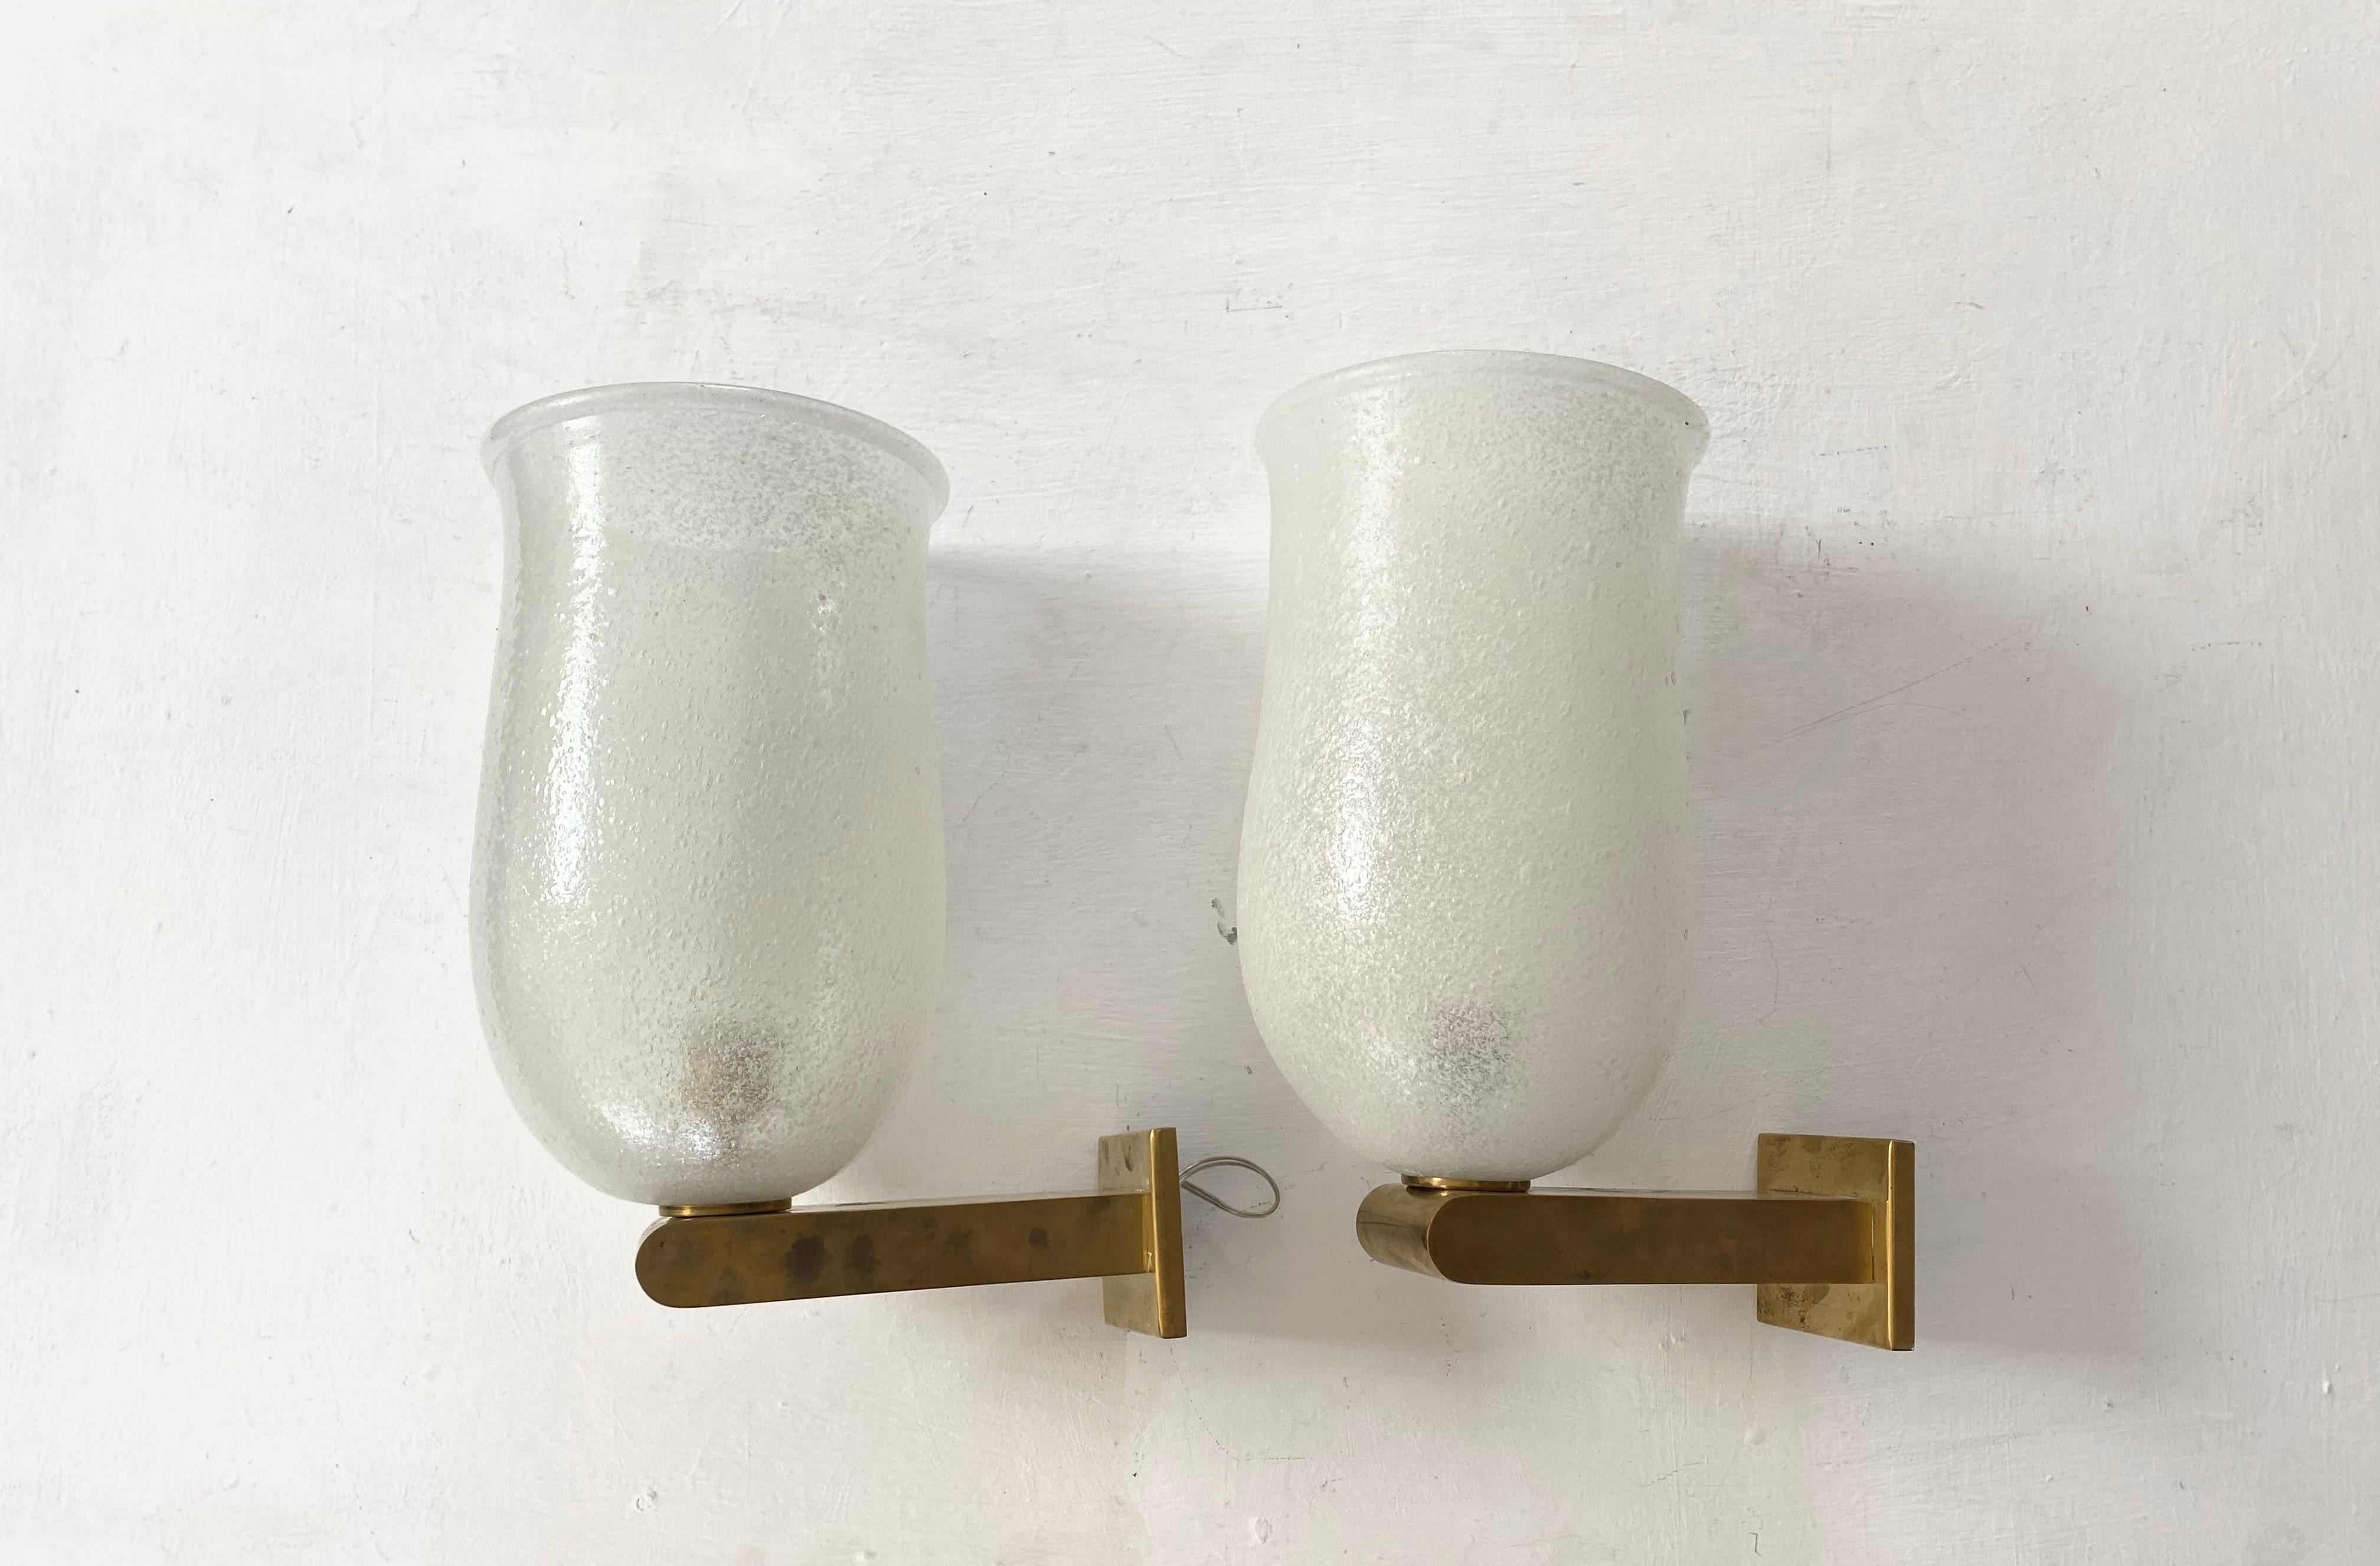 Large Murano glass sconces. 
The glass shade is manufactured in the Bollicine technique which was very characteristic of the Venini factory and their Art Deco era designs.
Each sconce holds one e27 bulb and has been recently rewired.
The brass can